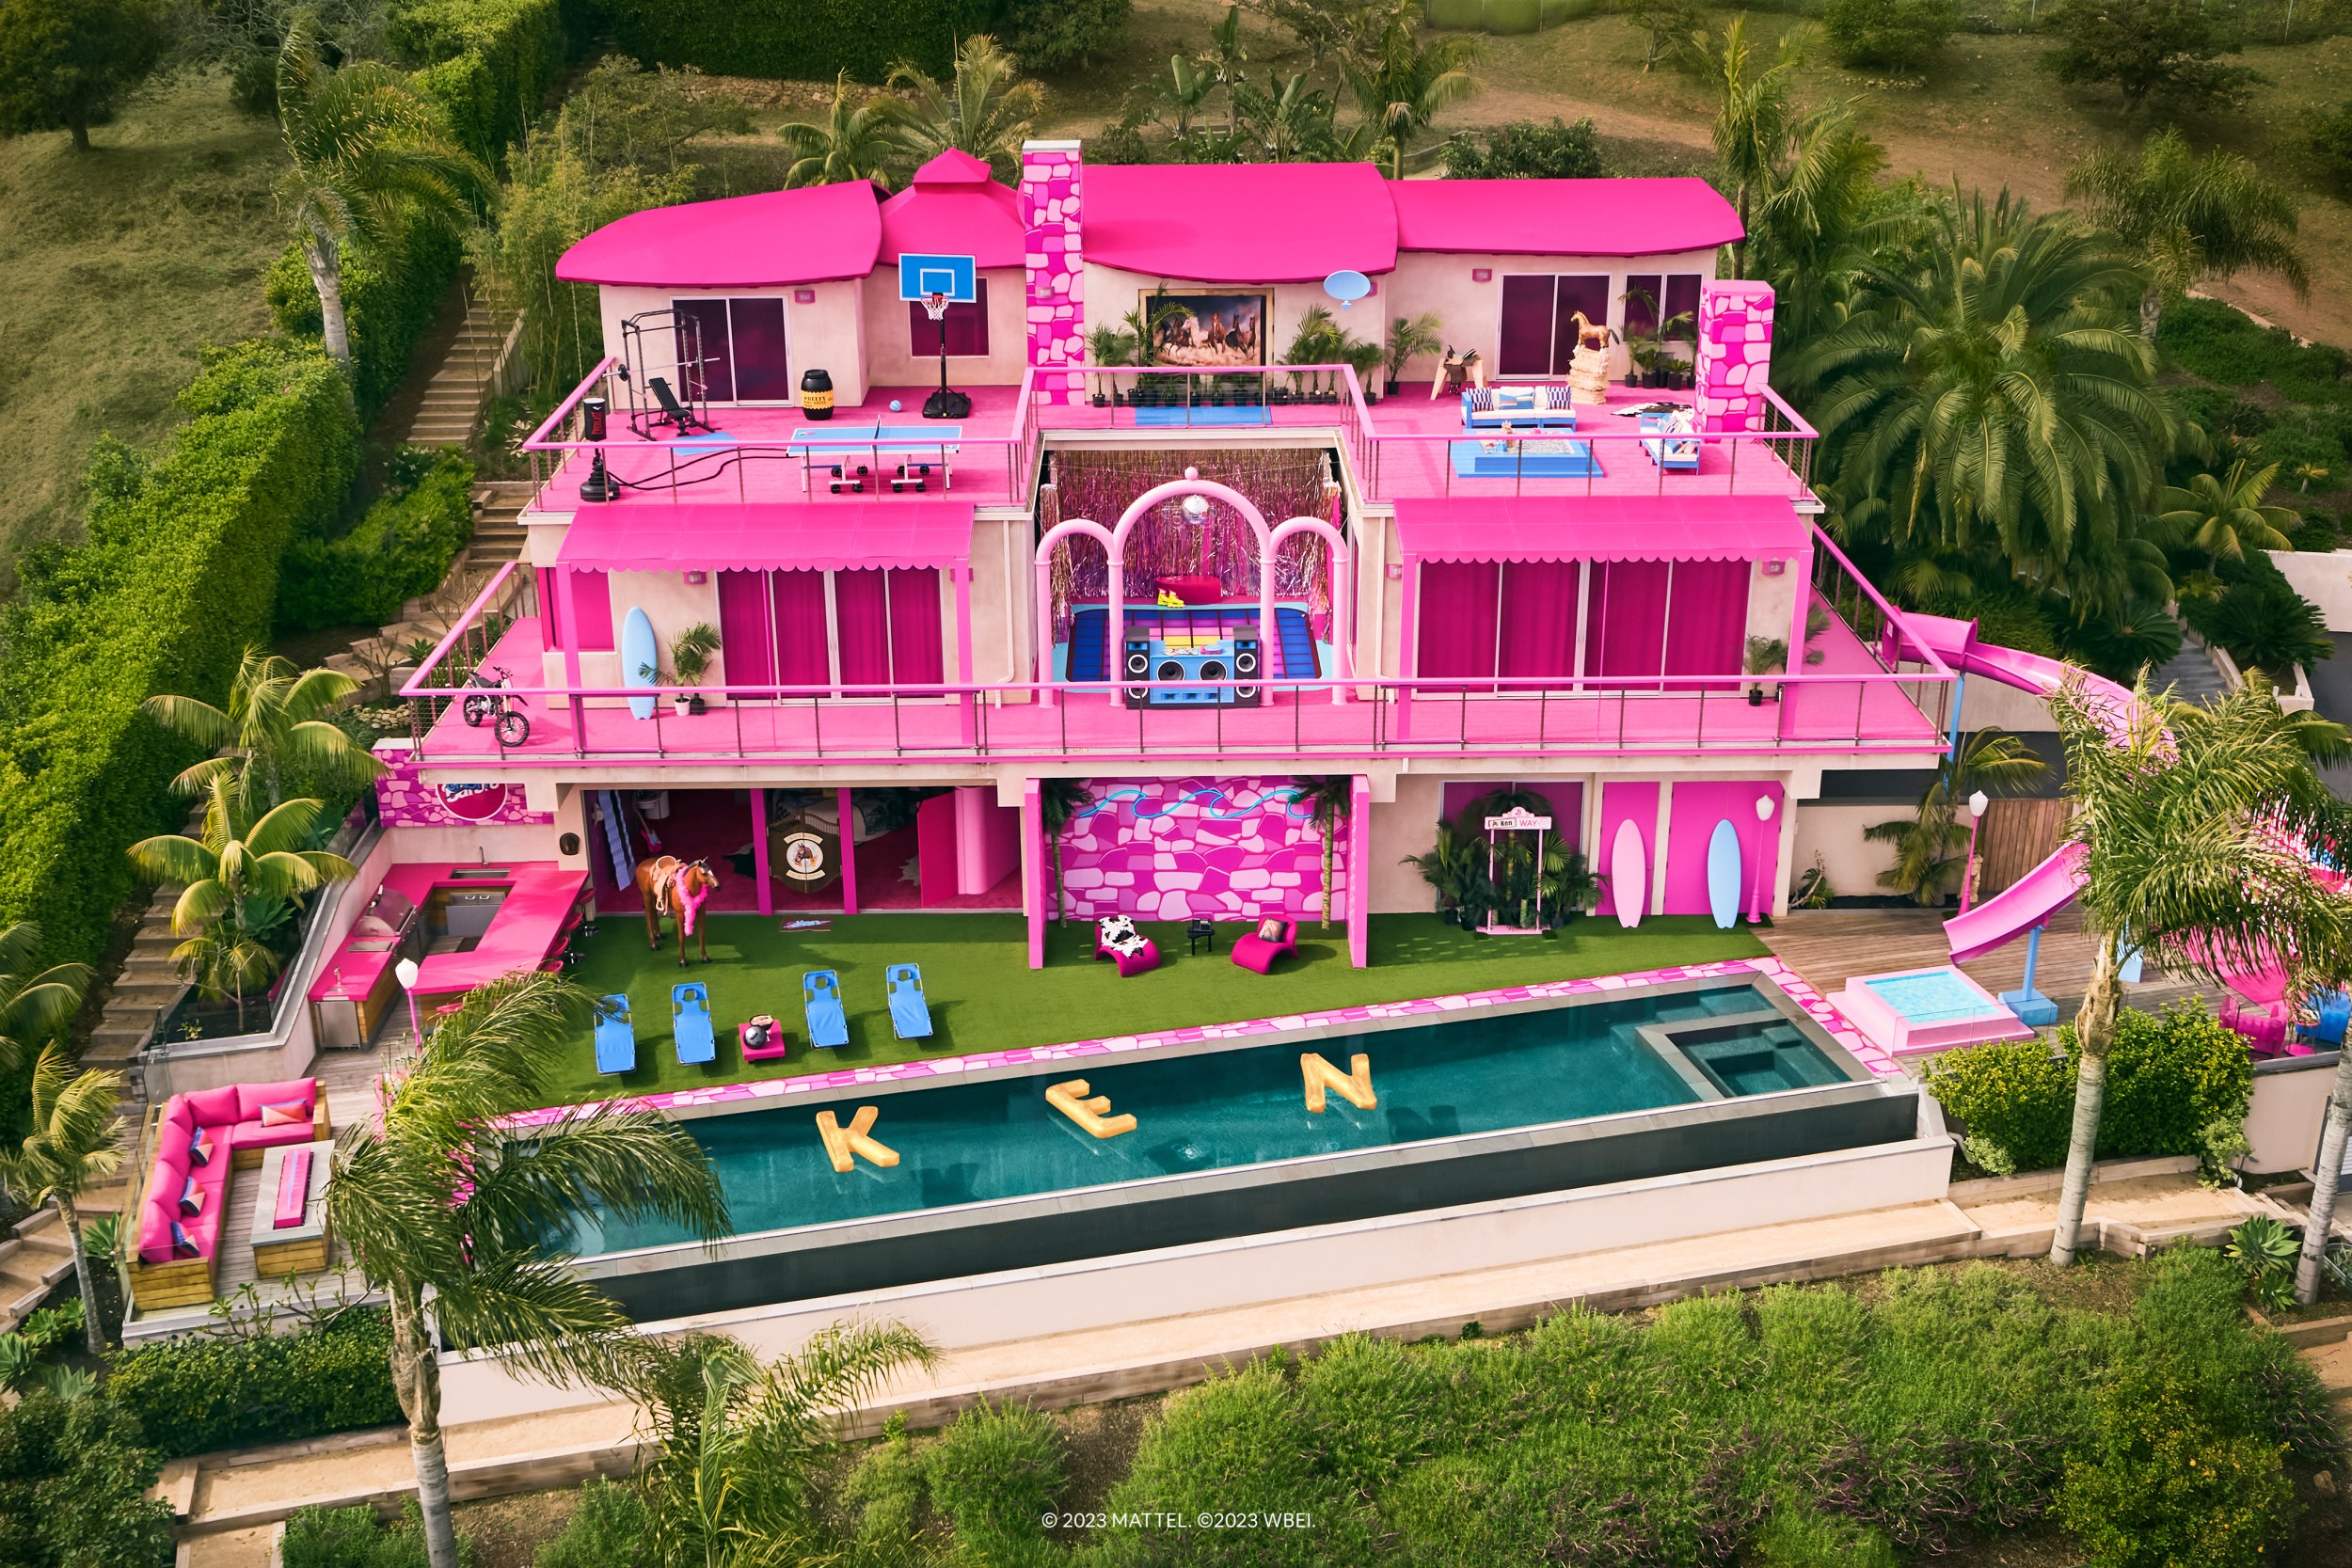 Barbie's Malibu DreamHouse is back Airbnb – but this time, hosting